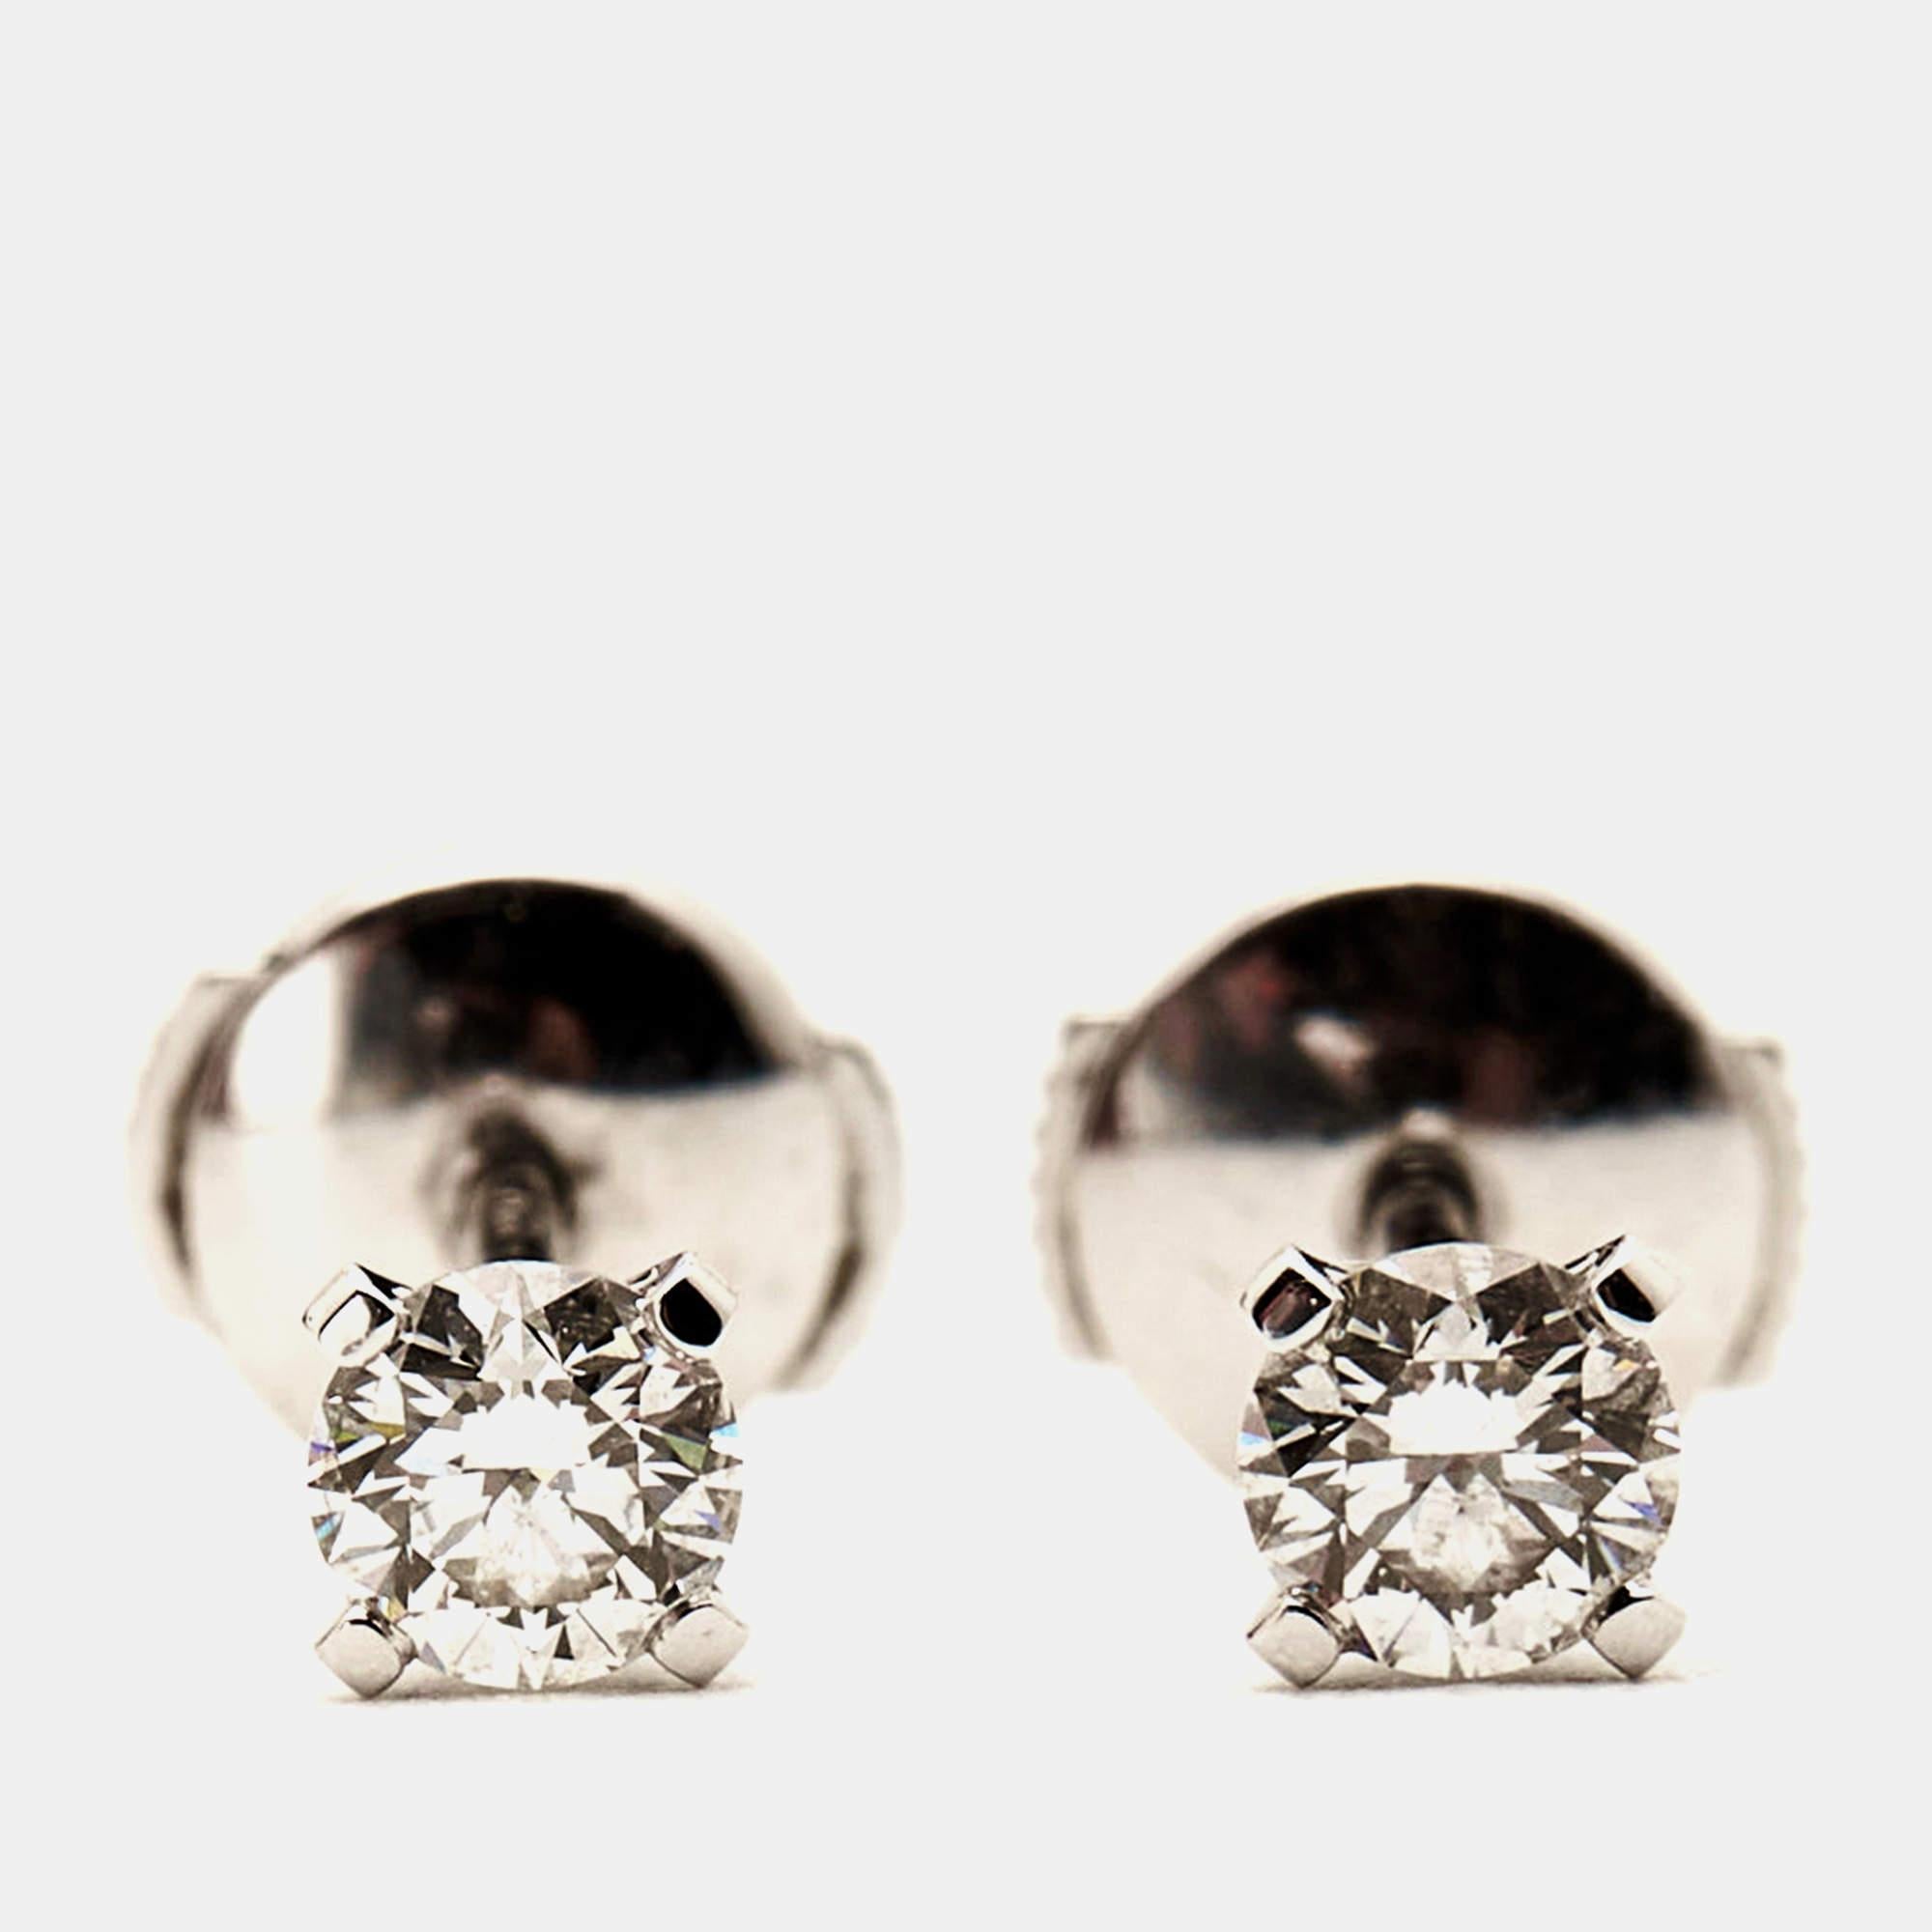 Aesthetic Movement Cartier 1895 Solitaire Diamond 18k White Gold Stud Earrings For Sale